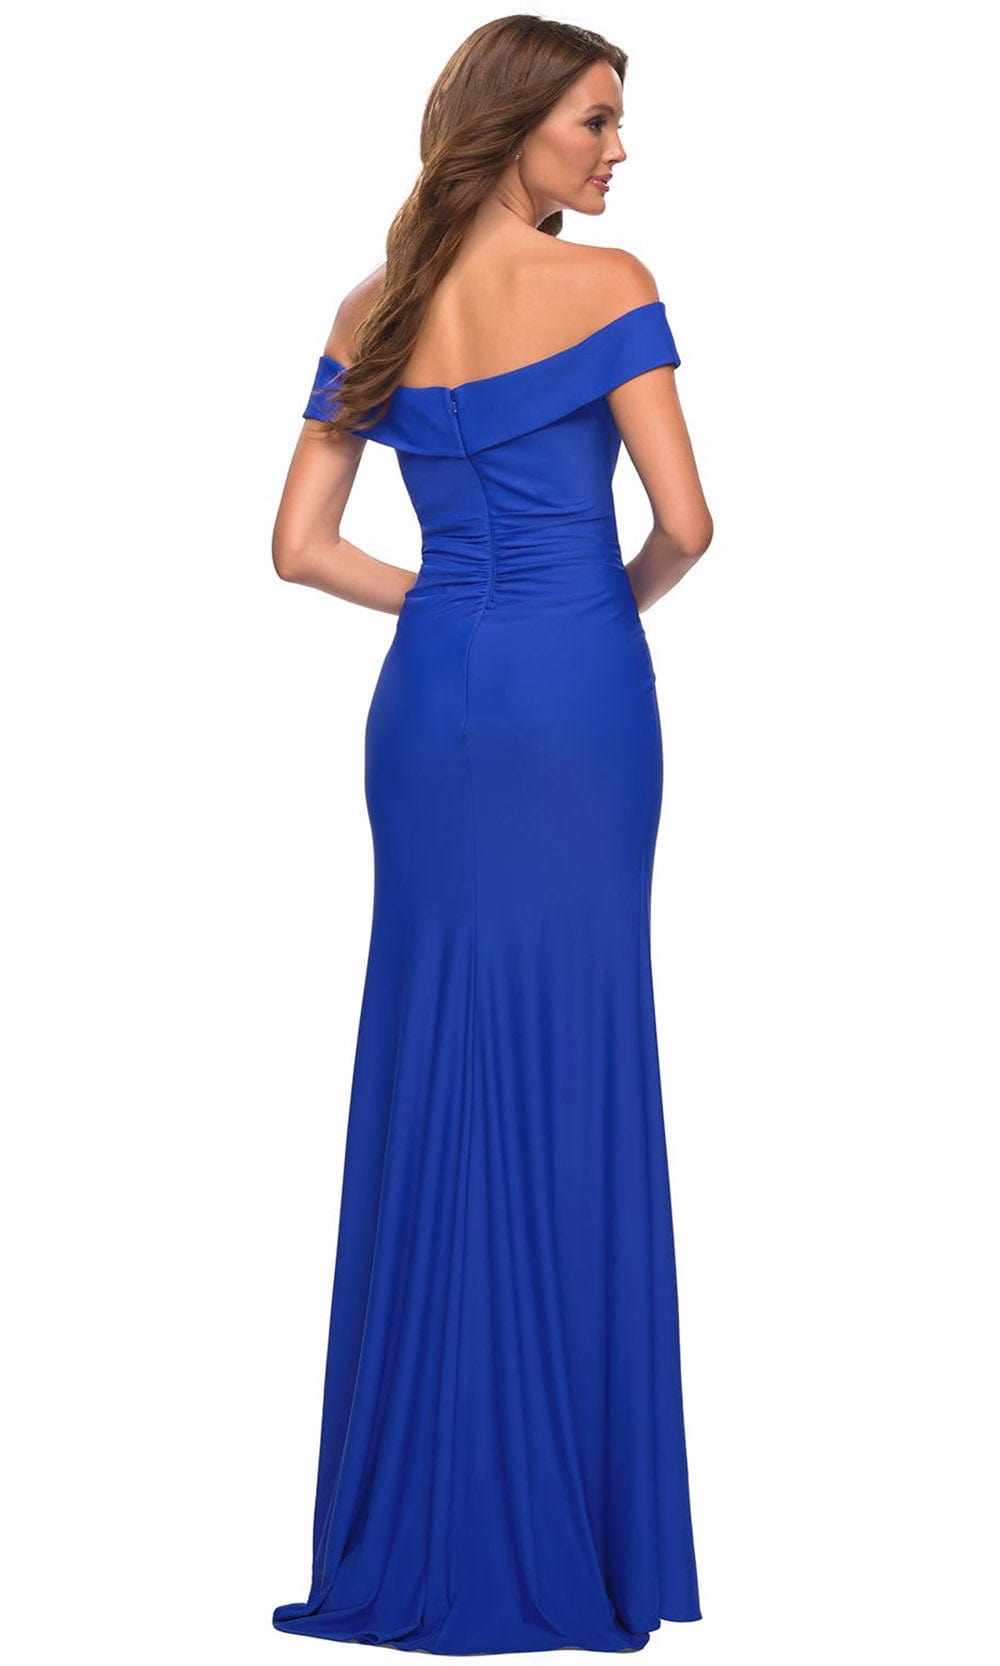 La Femme 30703 - Ruched Sheath Gown Special Occasion Dress